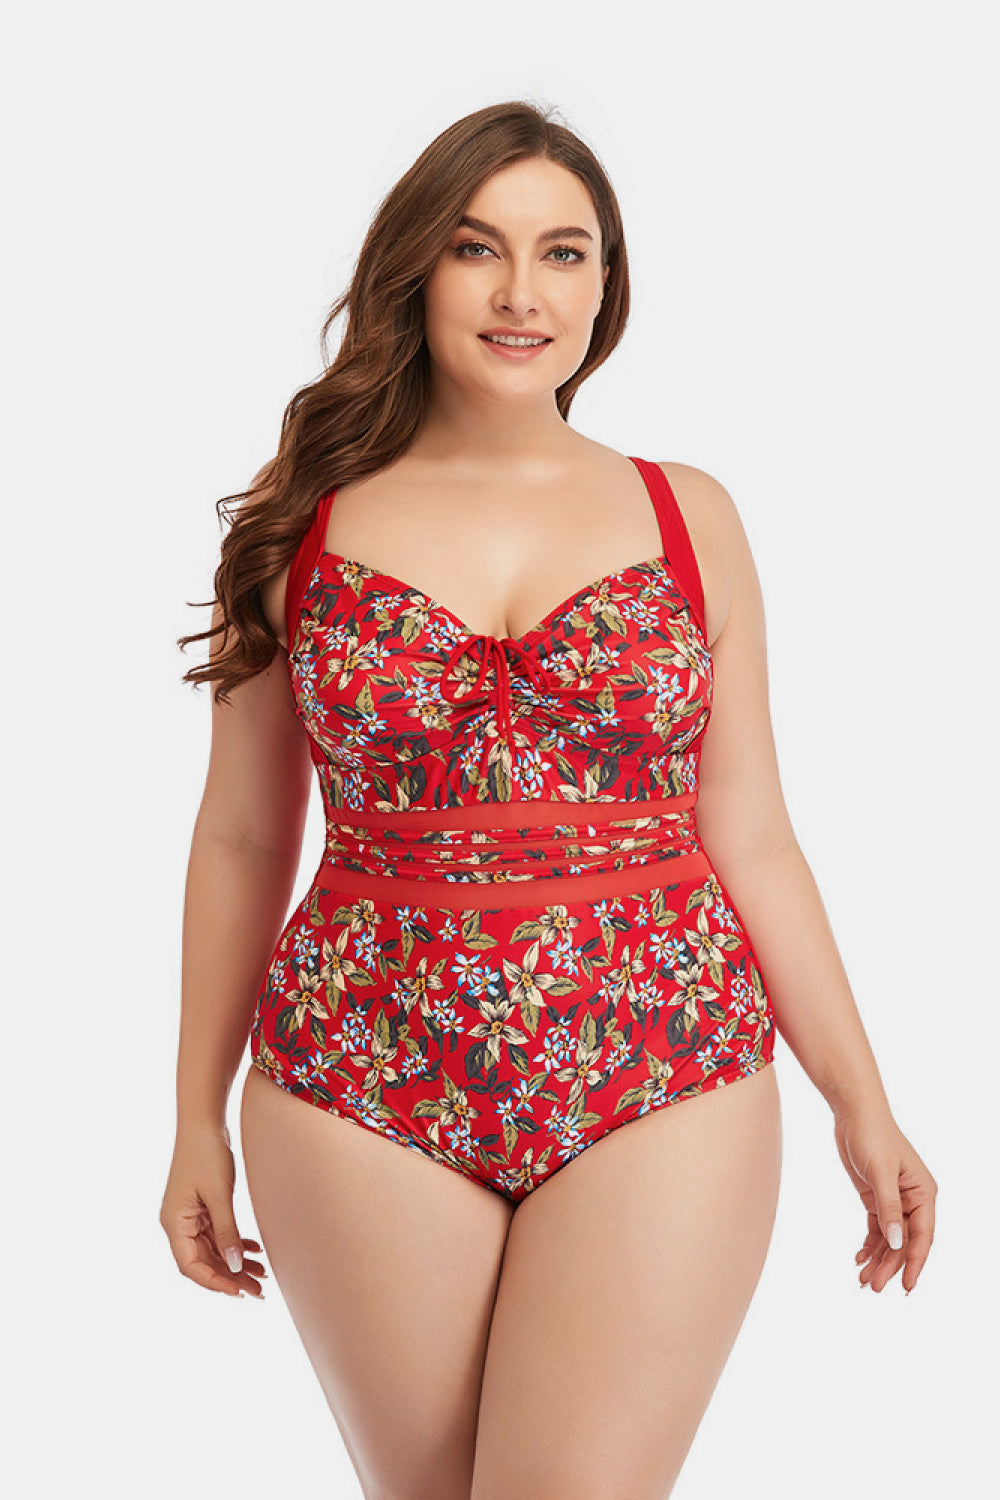 Floral Drawstring Detail One-Piece Swimsuit - Red / M - Women’s Clothing & Accessories - Swimwear - 1 - 2024